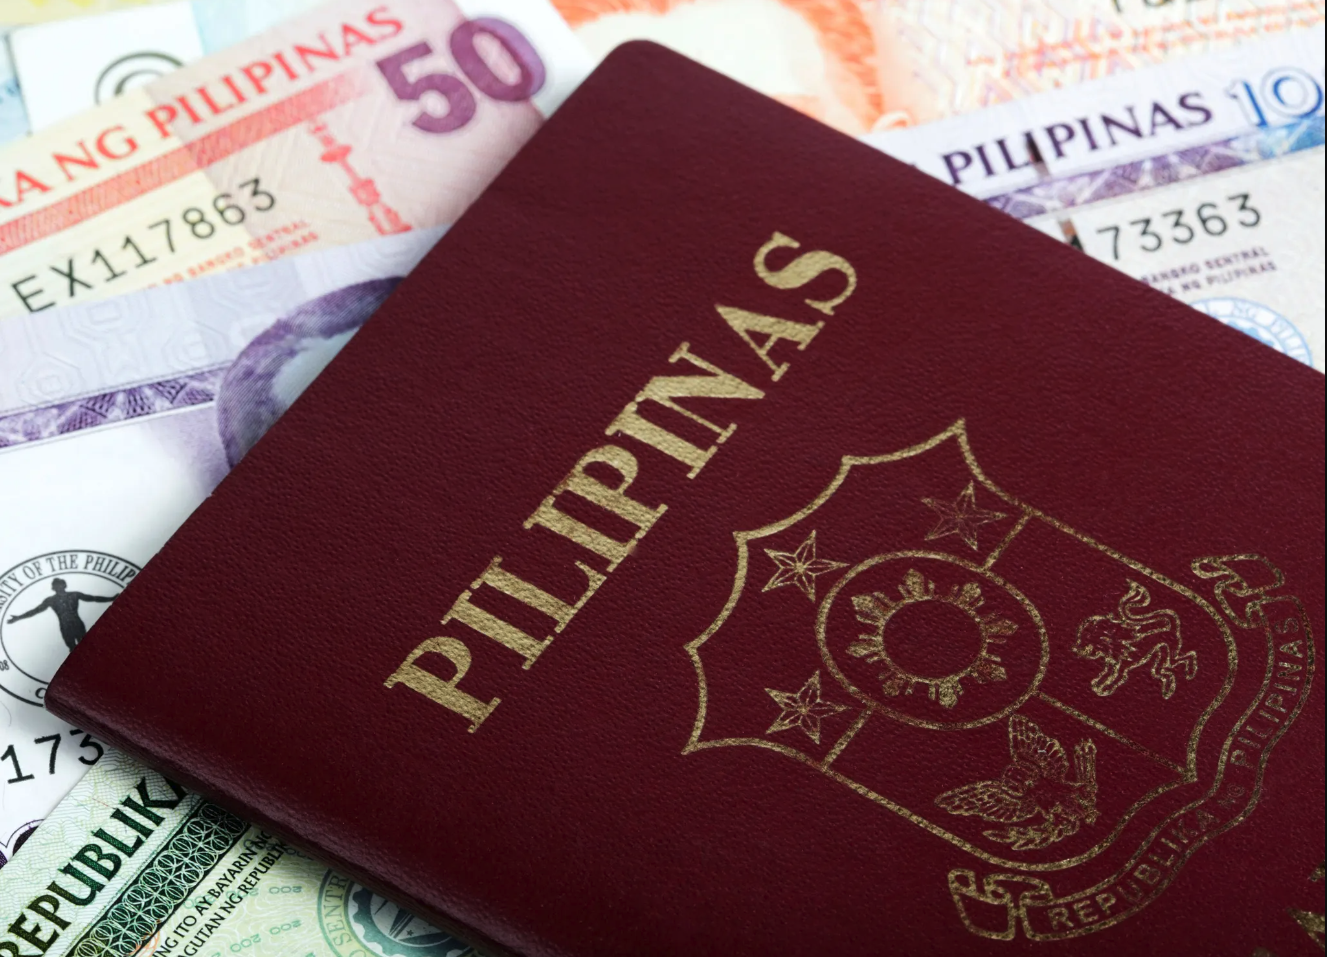 Consular Advisory on The Use of Philippine Passports as Collateral for a Loan